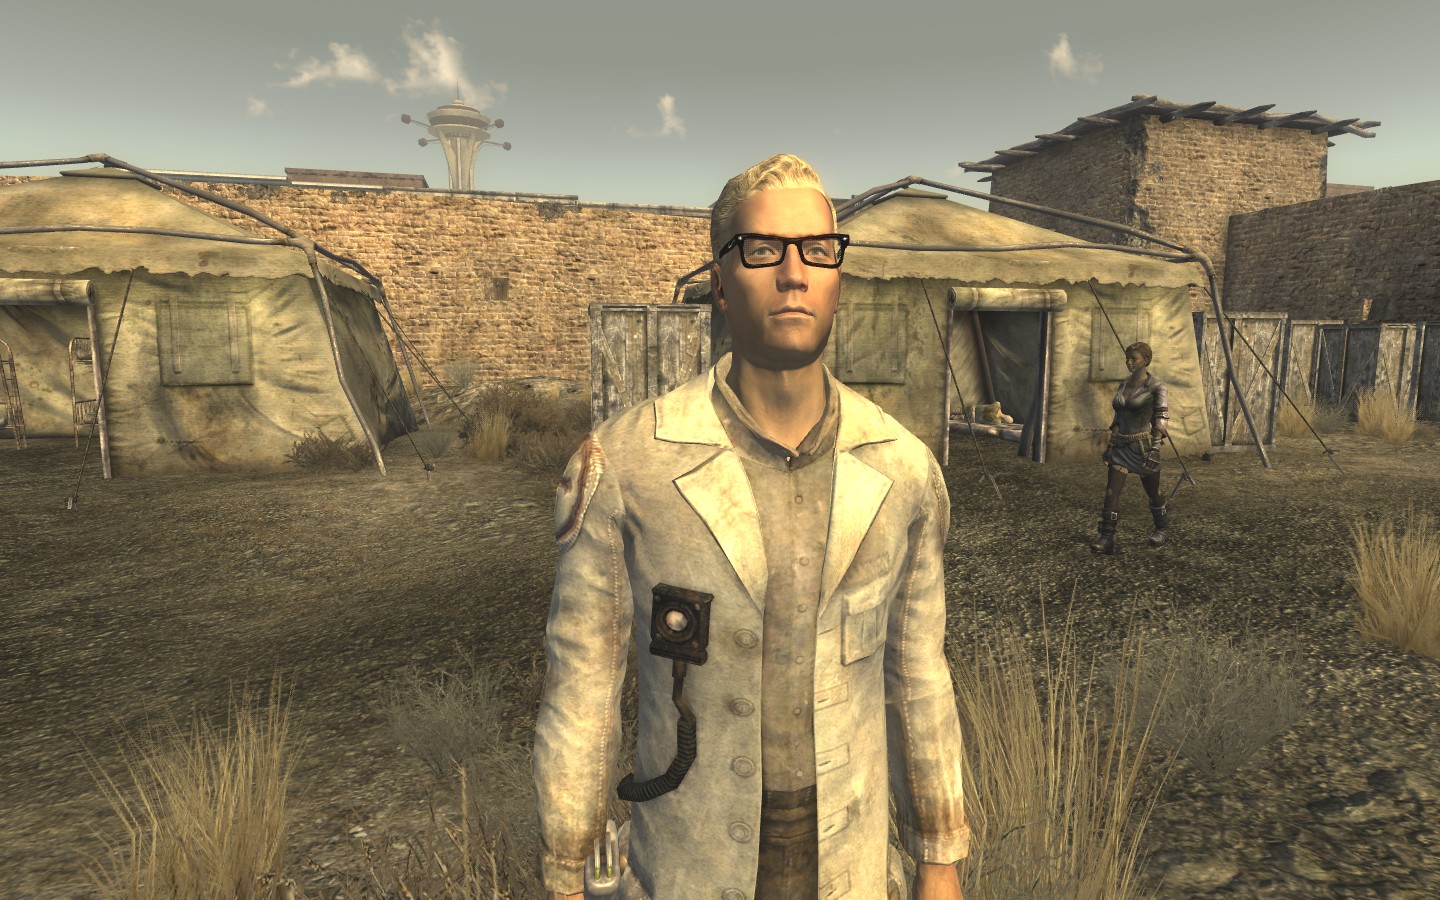 Fallout 4' update sparks rumours with mysterious 'newvegas2' files